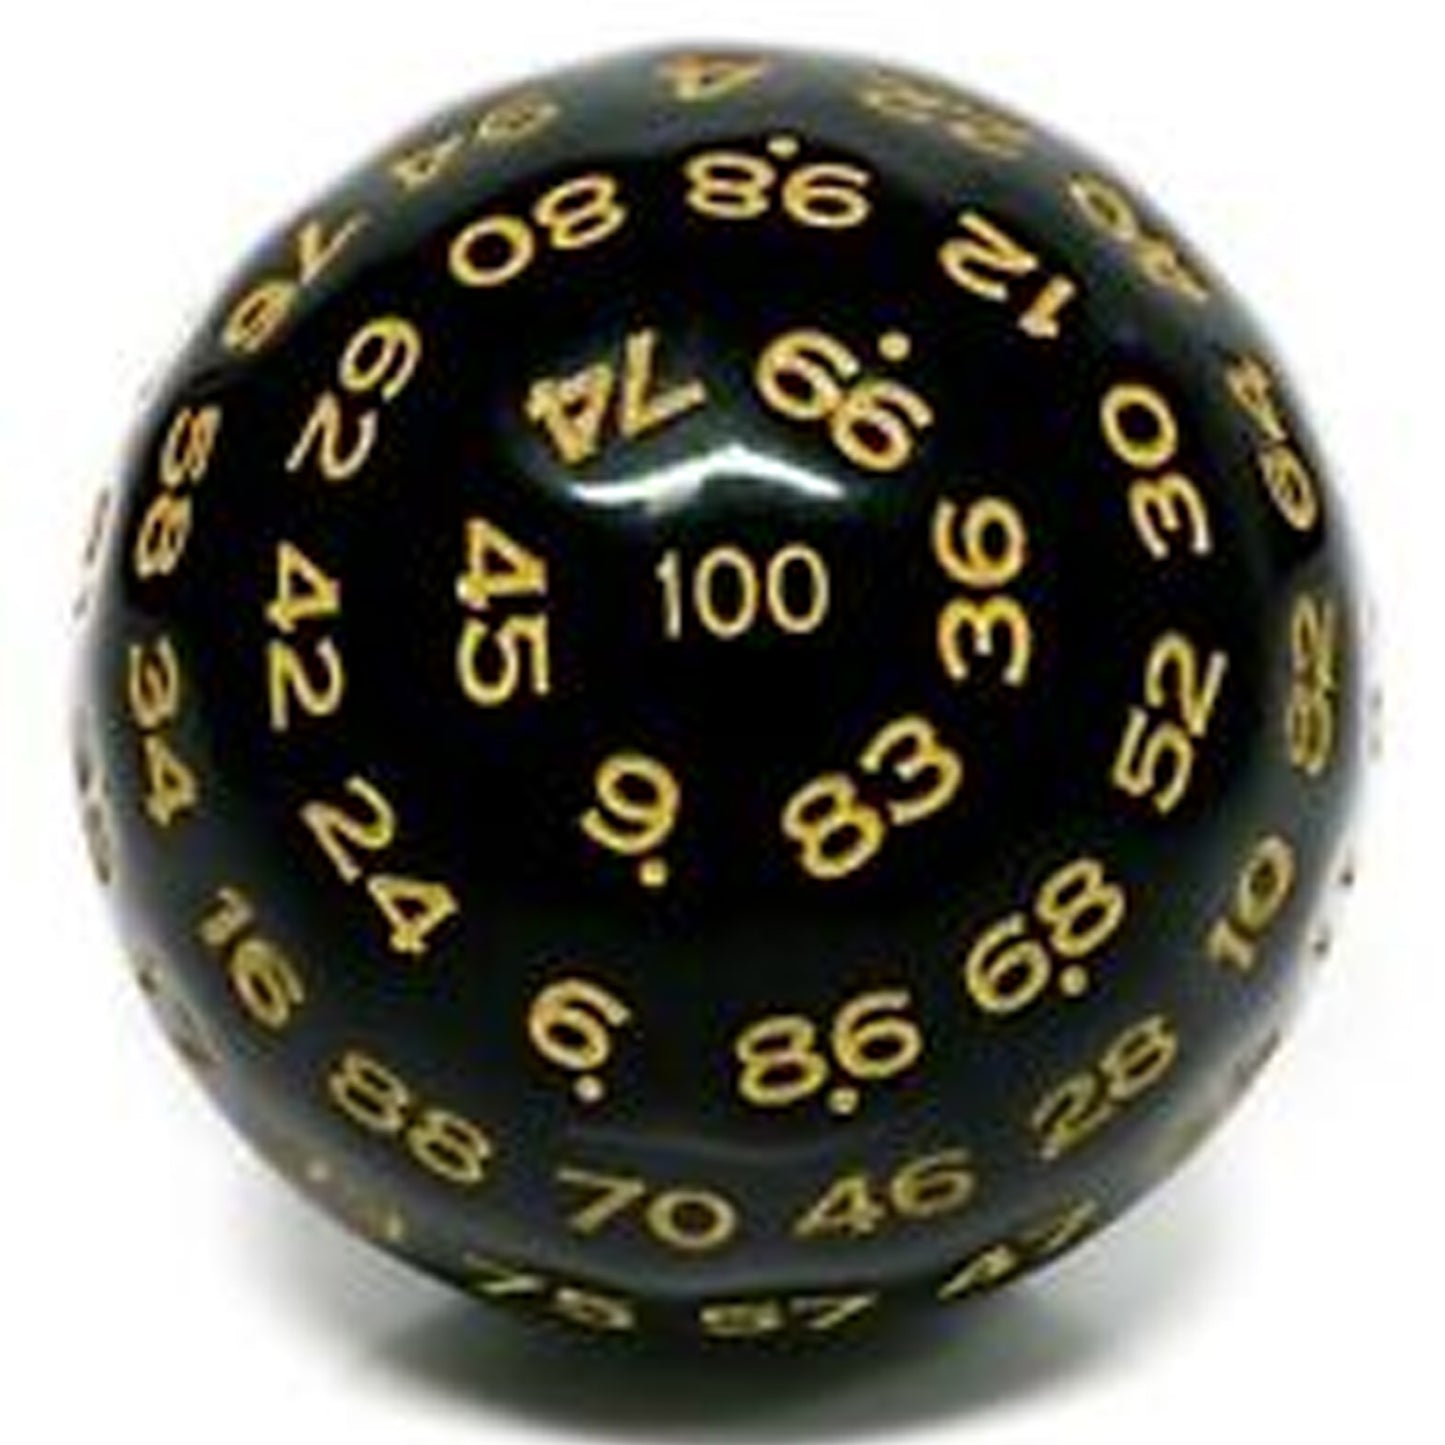 D100 One Hundred Sided Dice - Black with Yellow Numbers | Happy Piranha